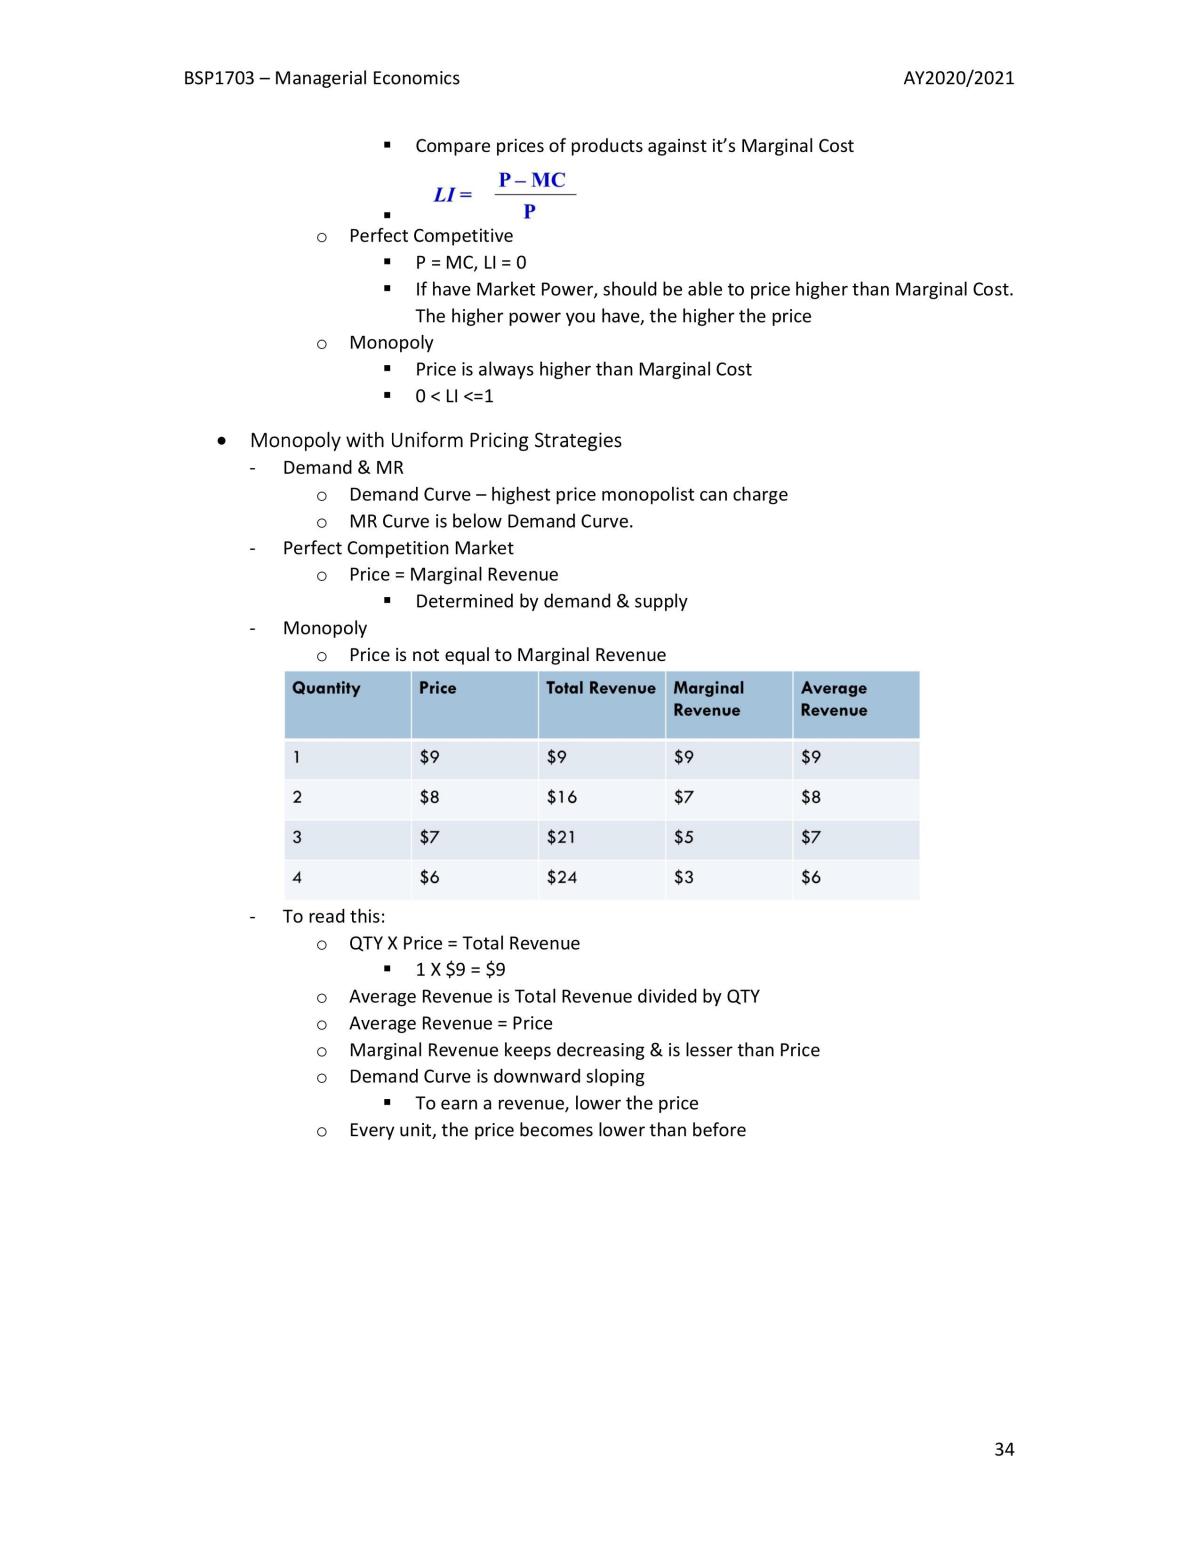 BSP1703 Managerial Economics Summary Notes - Page 34